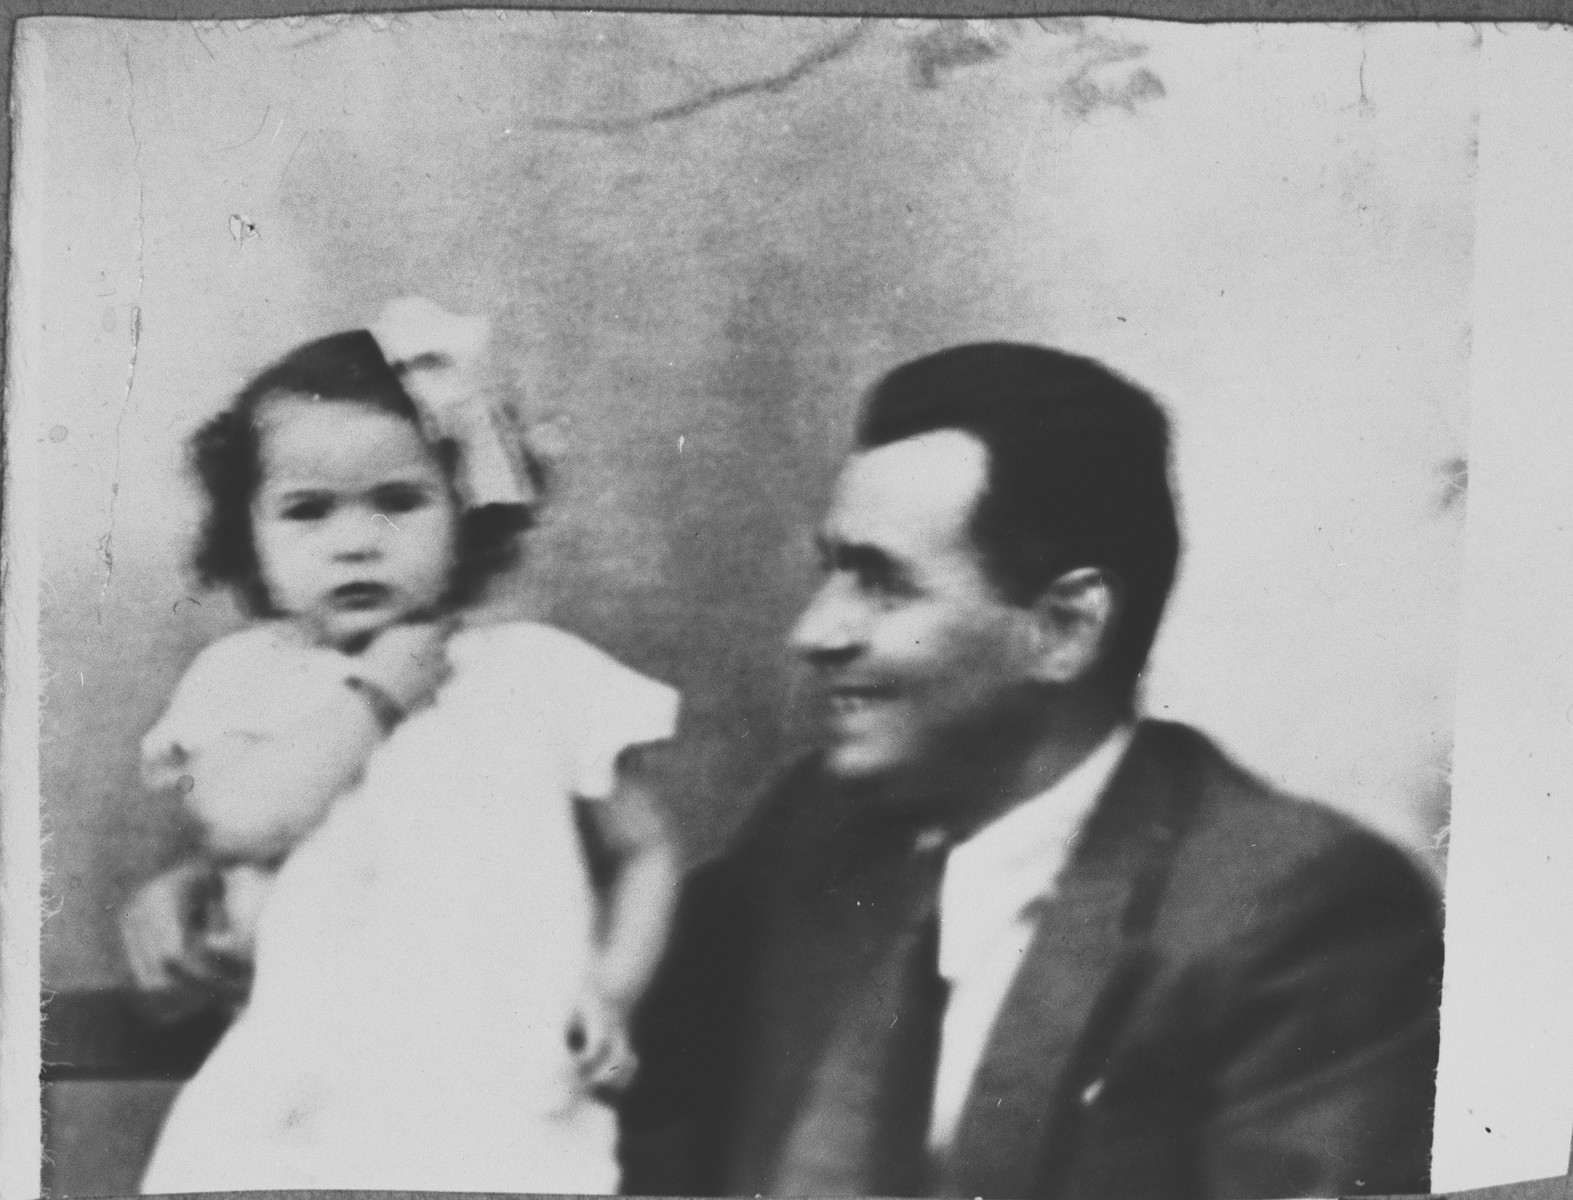 Portrait of Mois Kamchi, son of Solomon Kamchi, with a child.  Mois was an auto dealer.  He lived at Karagoryeva 107 in Bitola.